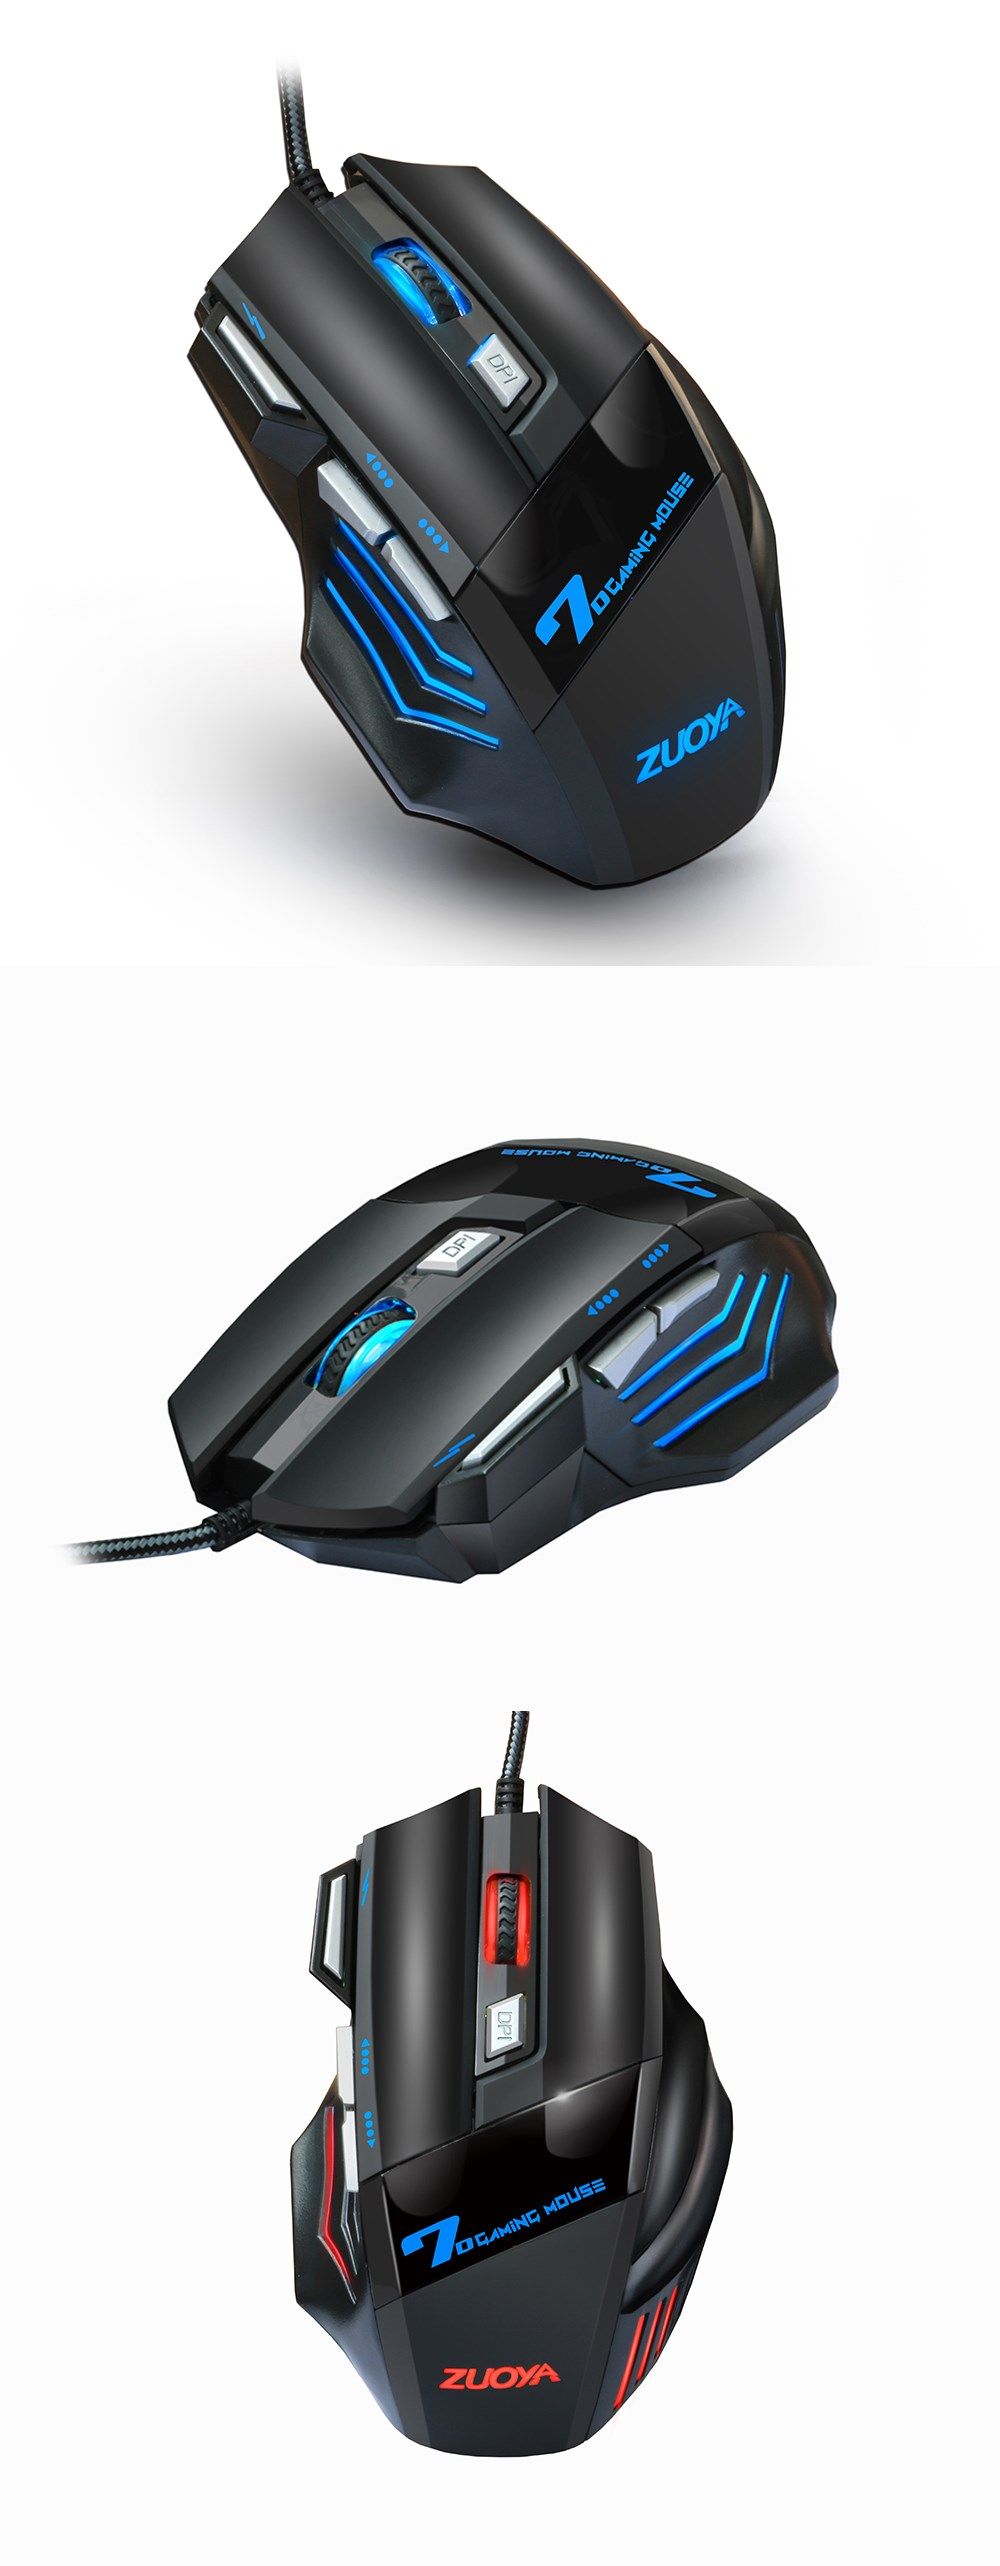 ZUOYA-MMR3-Wired-Mechanical-Gaming-Mouse-7-Keys-5500DPI-LED-Optical-USB-Mouse-Mice-Game-Mouse-Silent-1615039